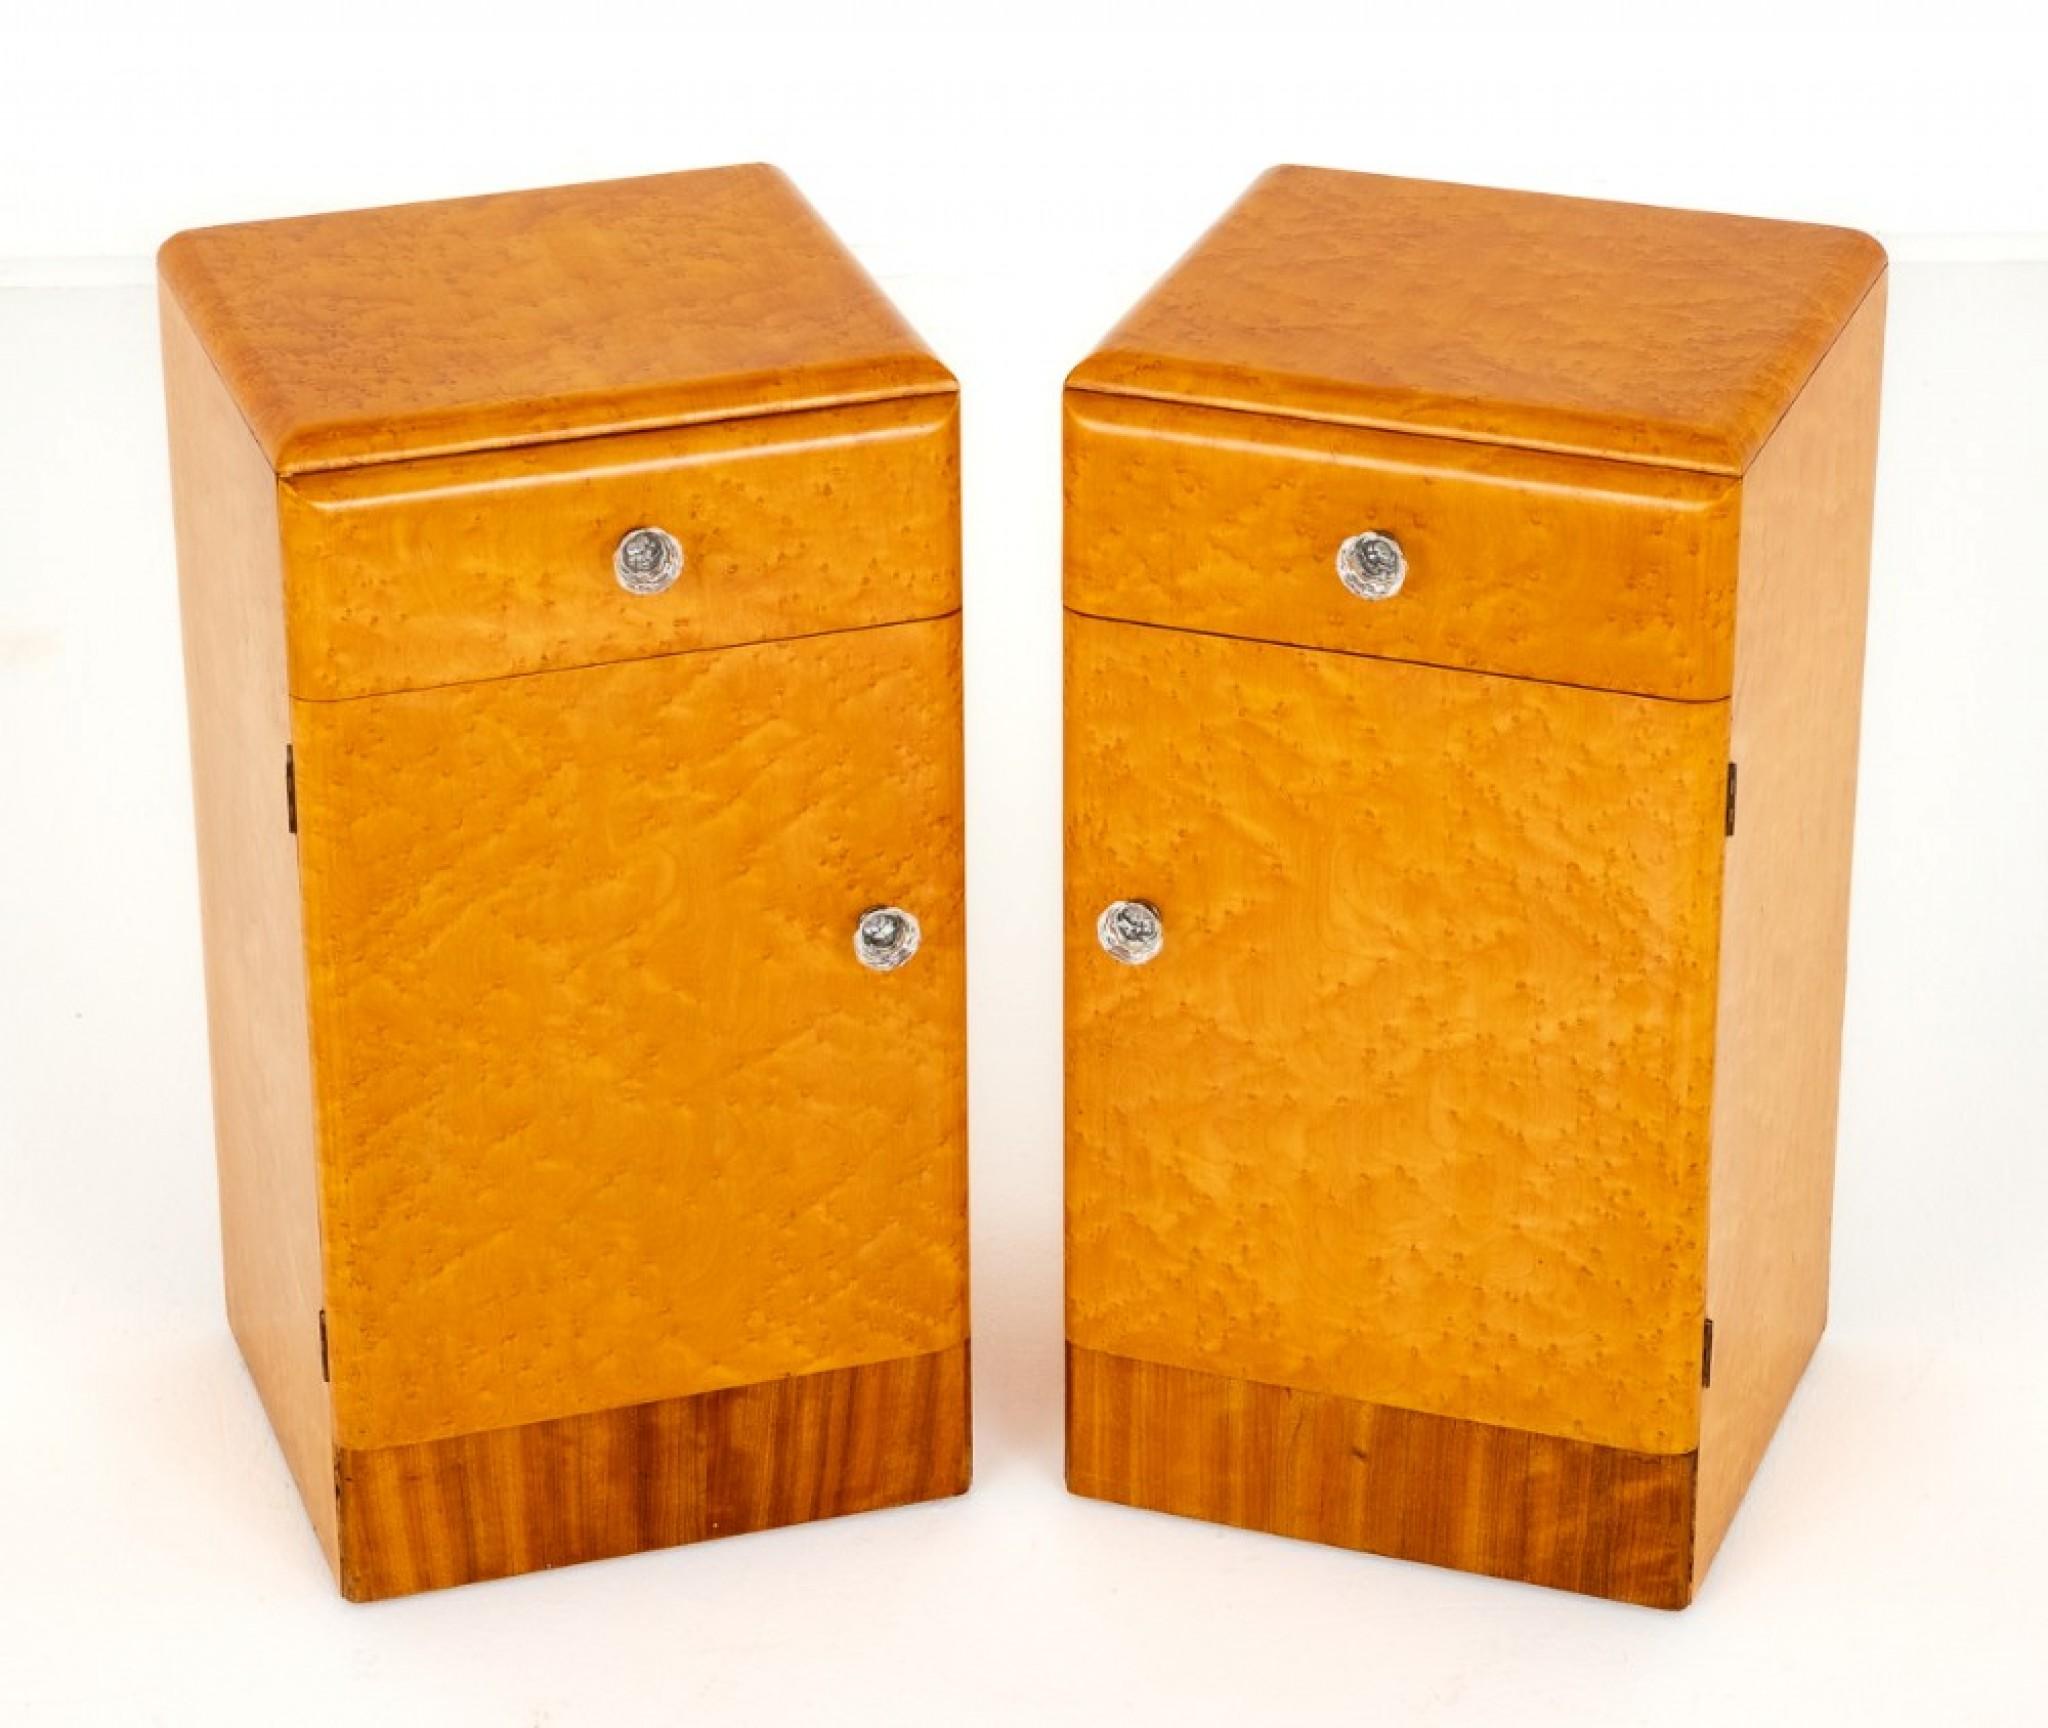 Pair of Art Deco Birds Eye Maple Bedside Cabinets.
These Stylish Cabinets Feature Wonderful Birds Eye Maple Veneers to the Fronts, Tops and Sides.
Each Cabinet Has 1 Interior Shelf and a Mahogany Lined Drawer.
The Cabinets are Finished off with